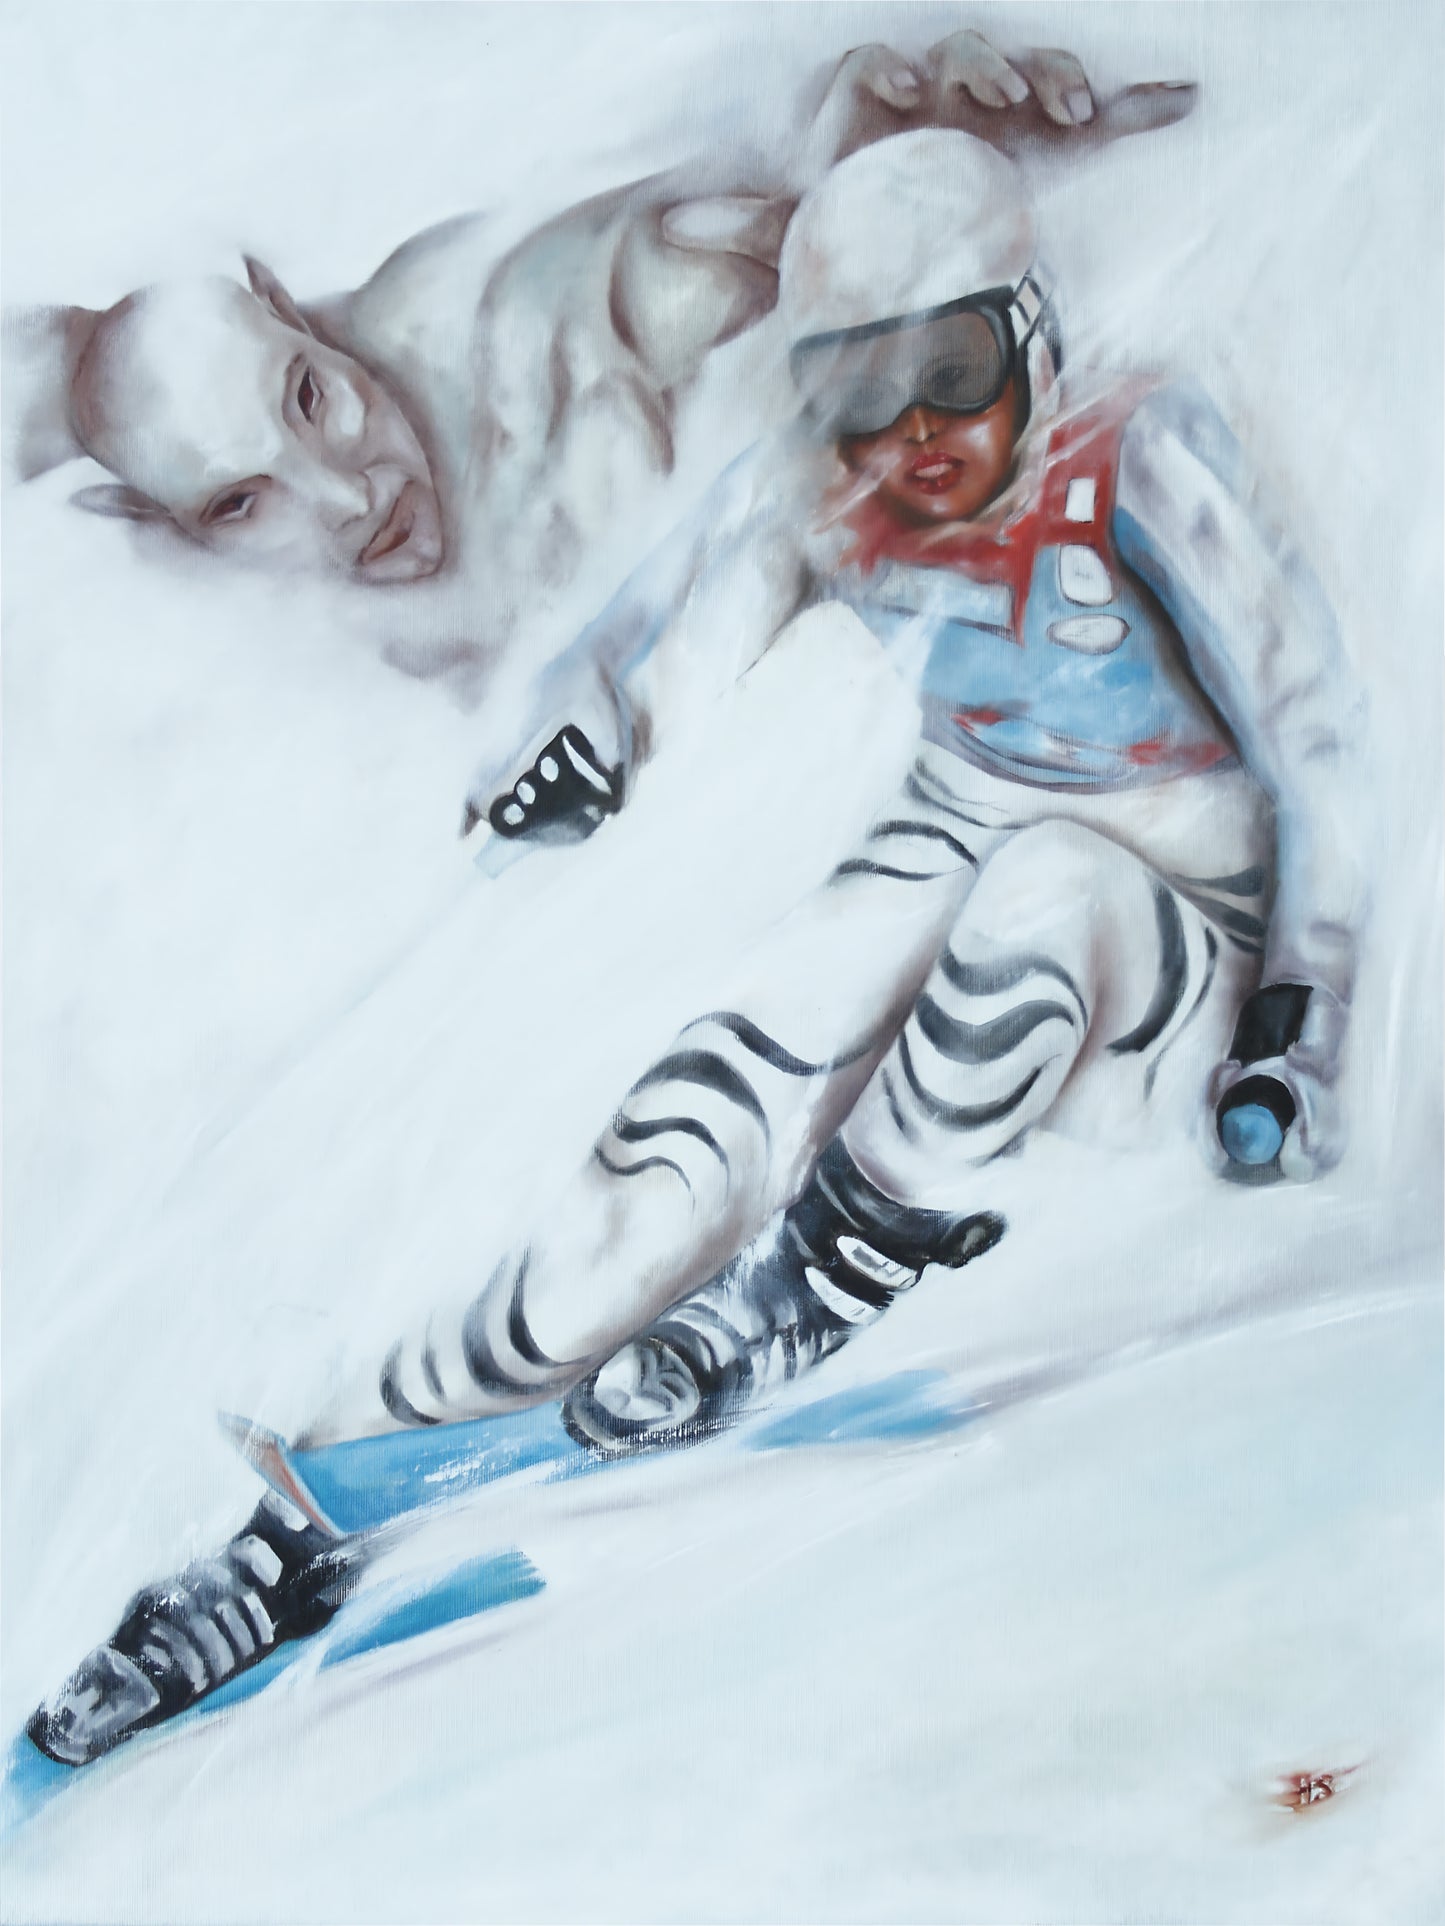 Canvas print, The Glacial Challenge, skier downhill